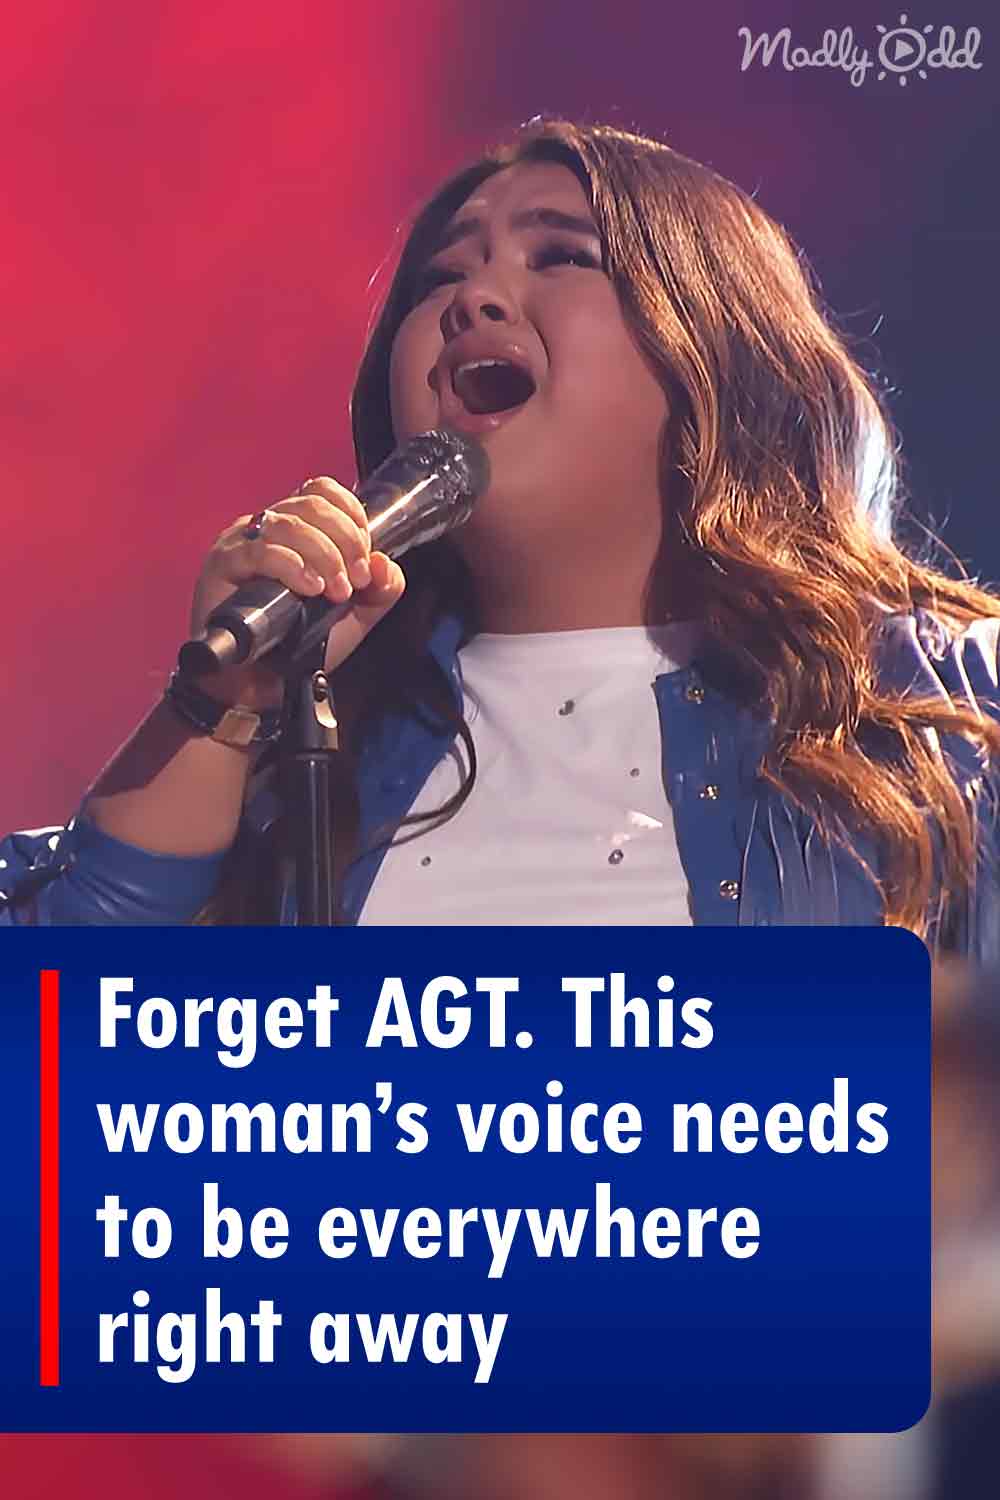 Forget AGT. This woman’s voice needs to be everywhere right away